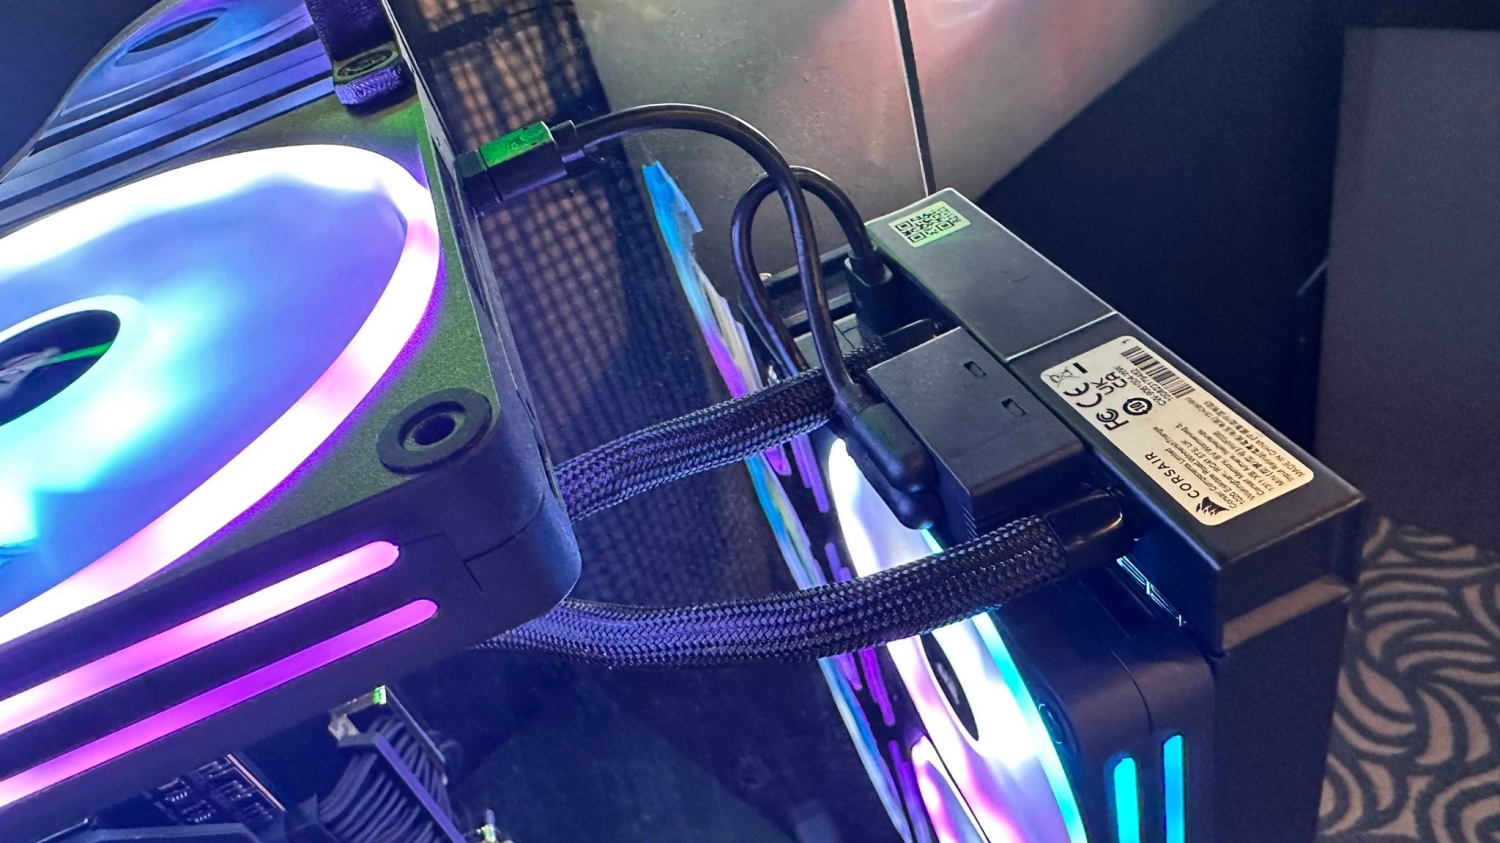 Corsair introduces iCUE Link to make PC builds easier, cleaner